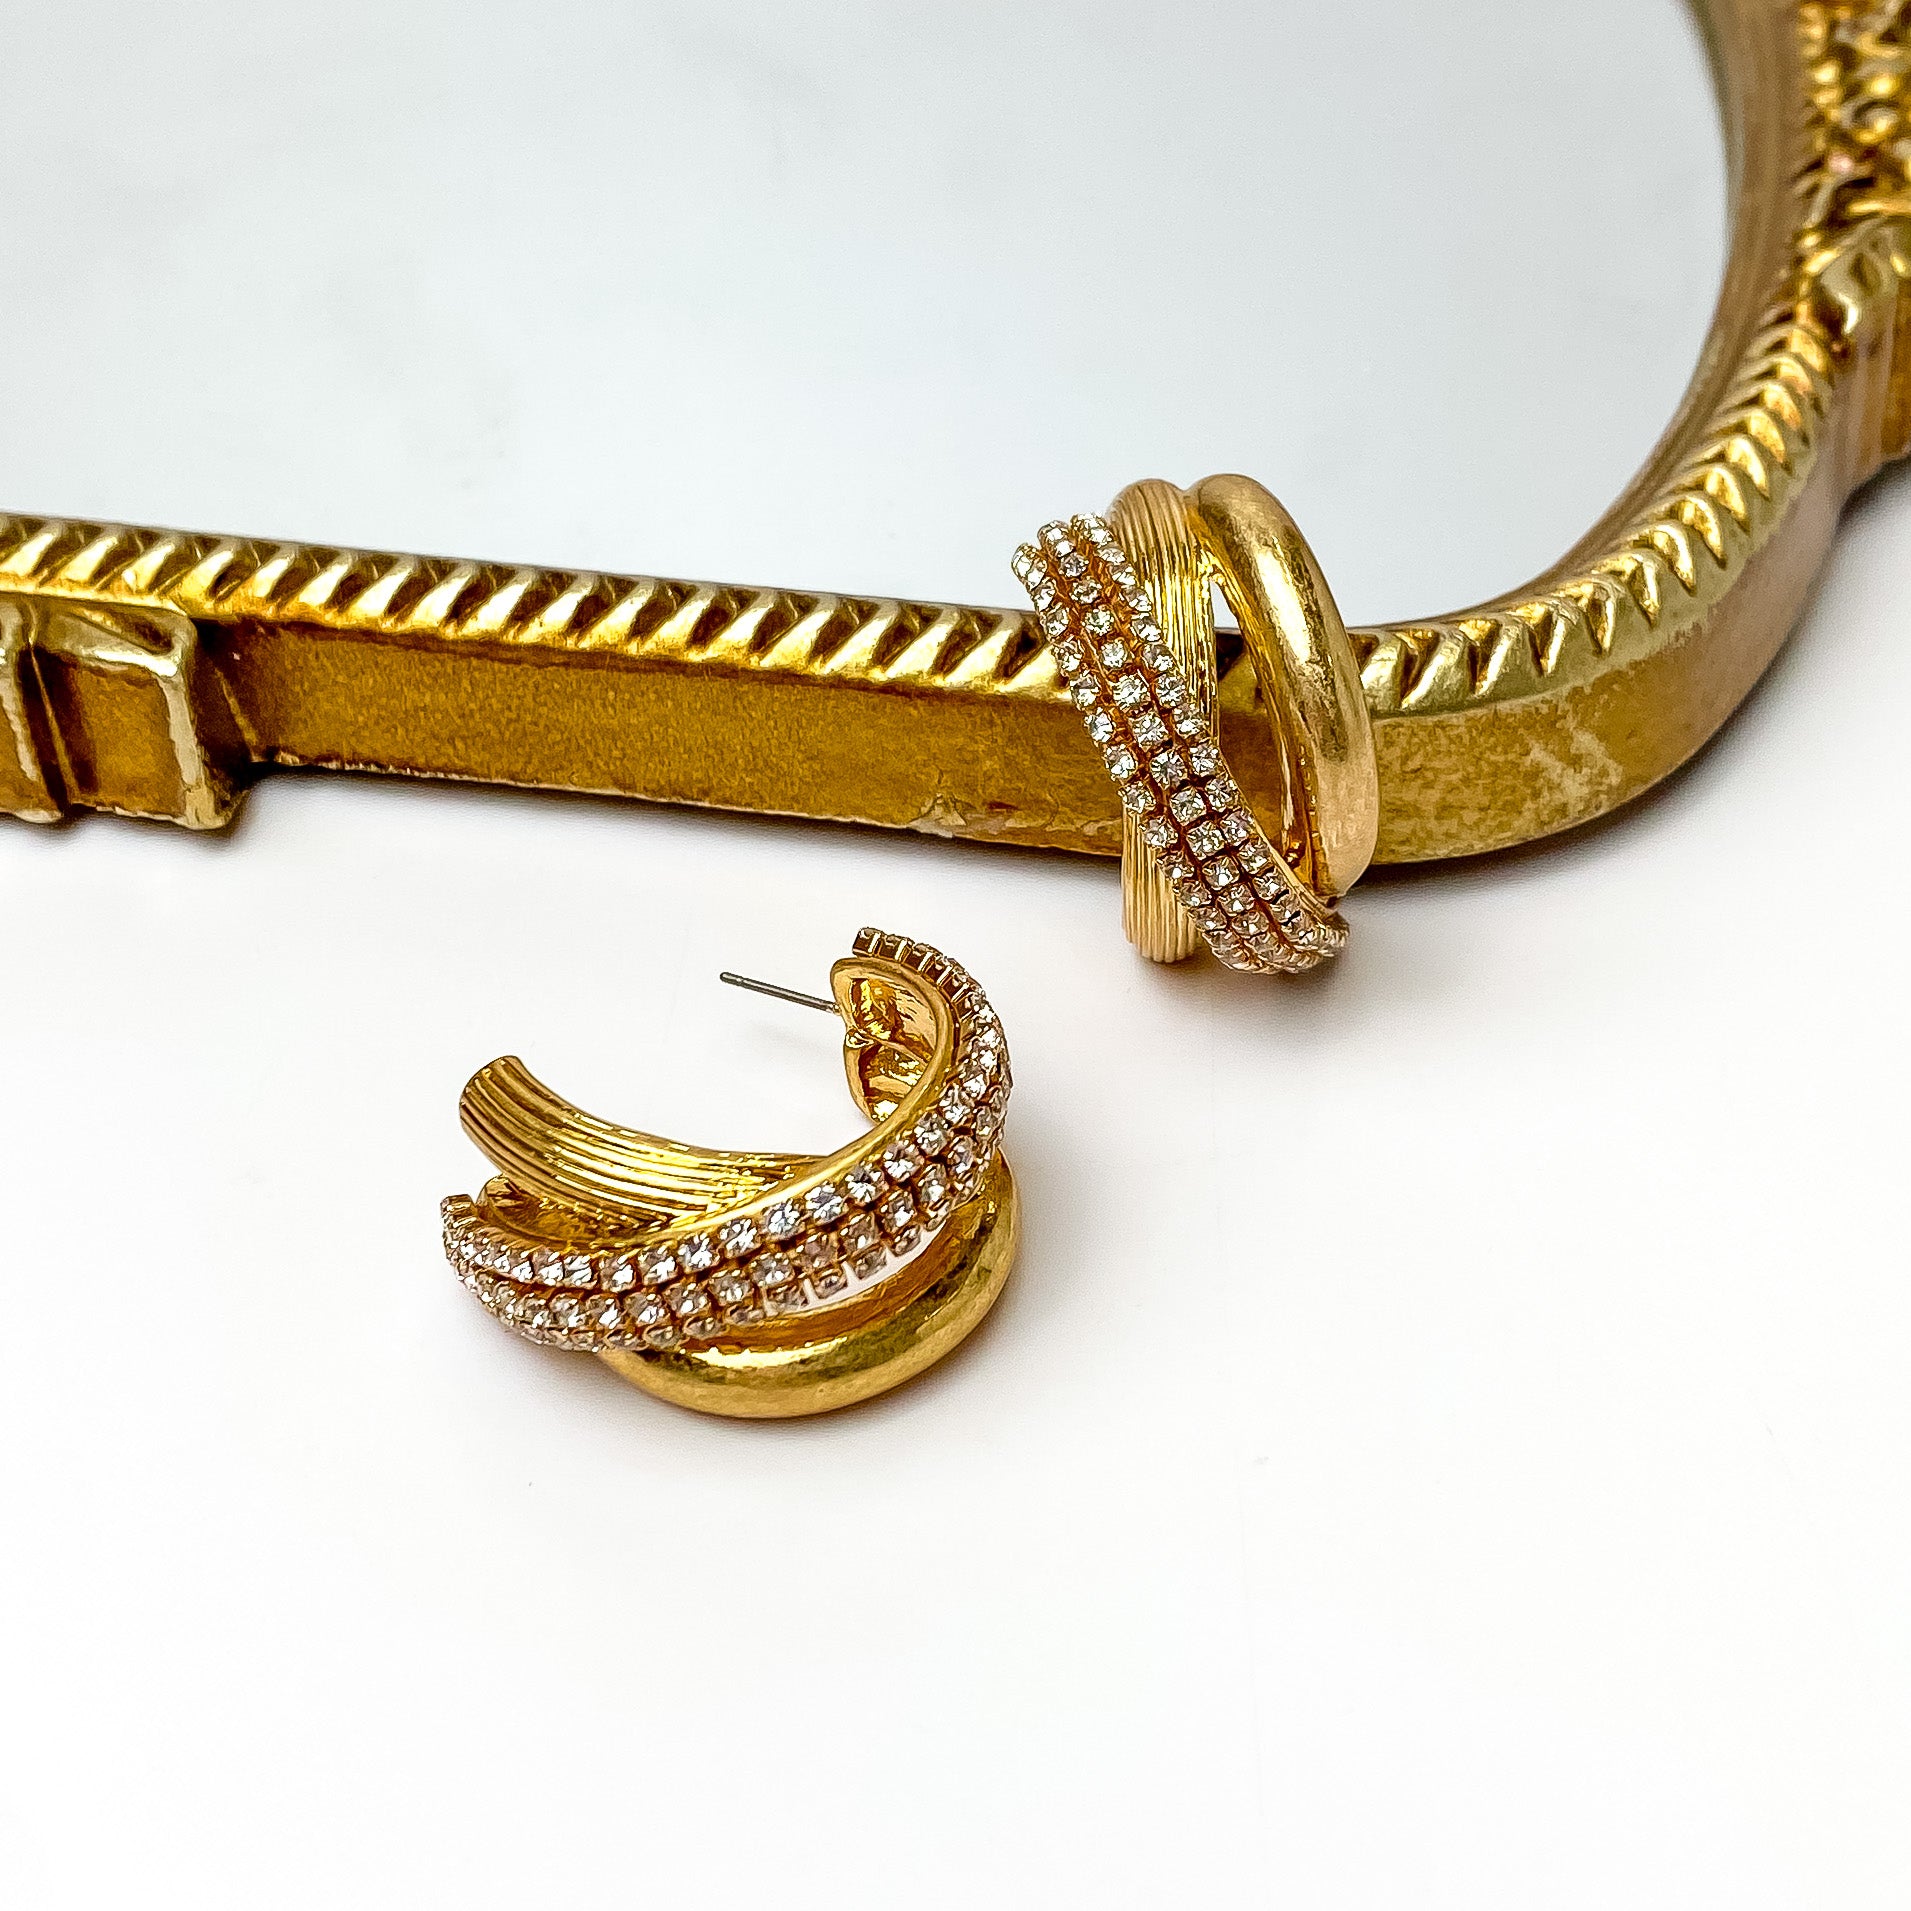 Three banded gold hoop earrings that are intertwined together. There is a smooth band, a striped band, and a crystal band. These earrings are pictured on a white background with one hoop leaning on a gold mirror. 